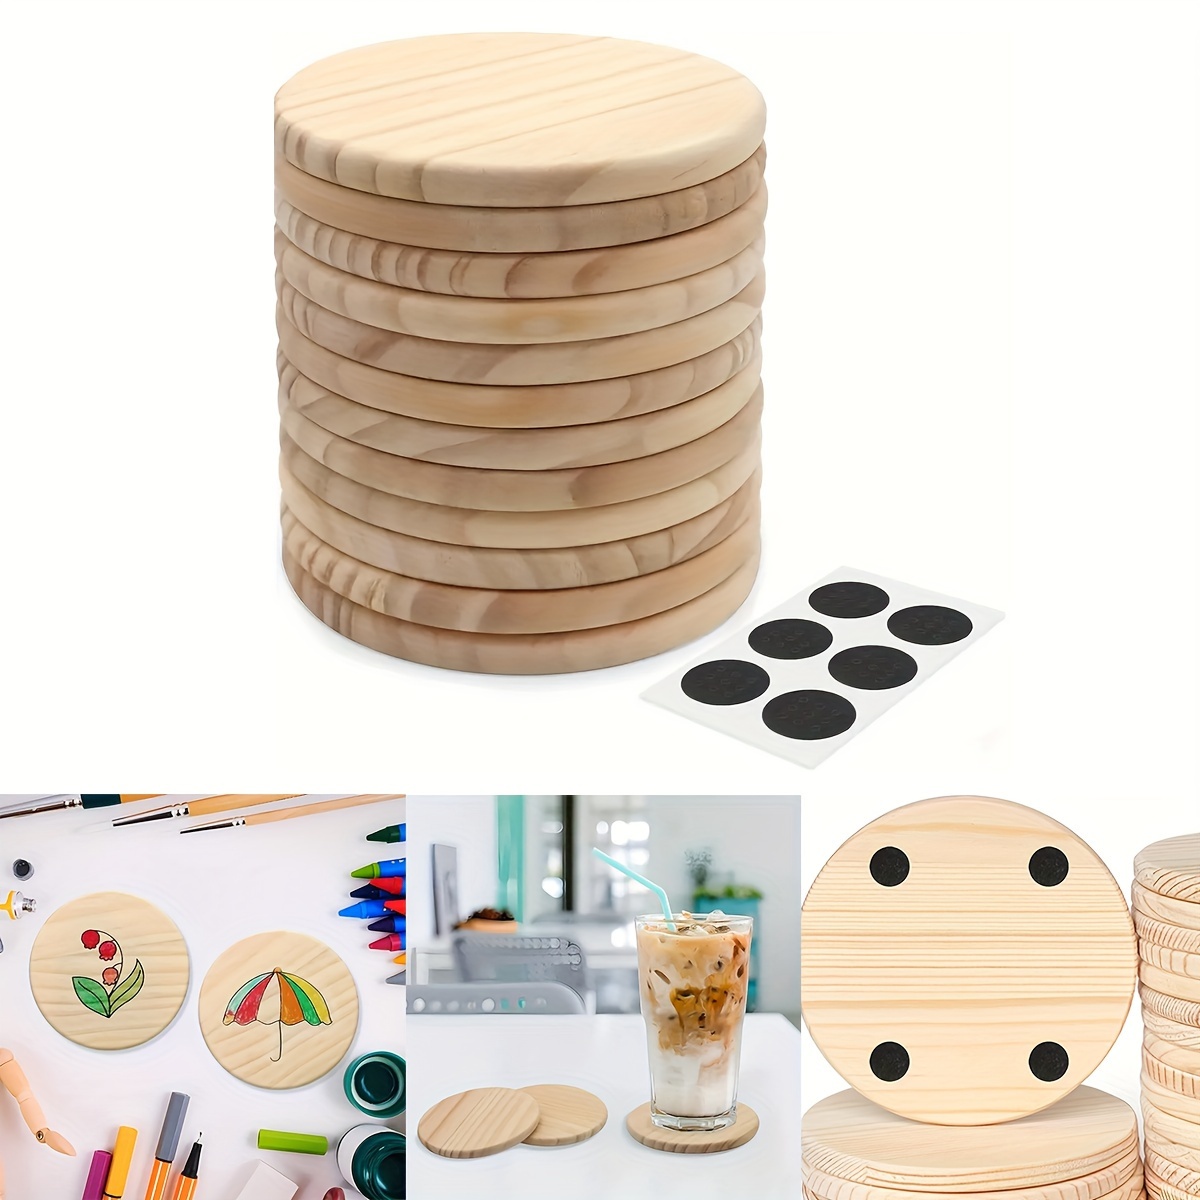 

Diy Wooden Coaster Set: 1 Blank Round Coaster With Grip Handle, Perfect For Staining, Painting, And Woodworking Projects